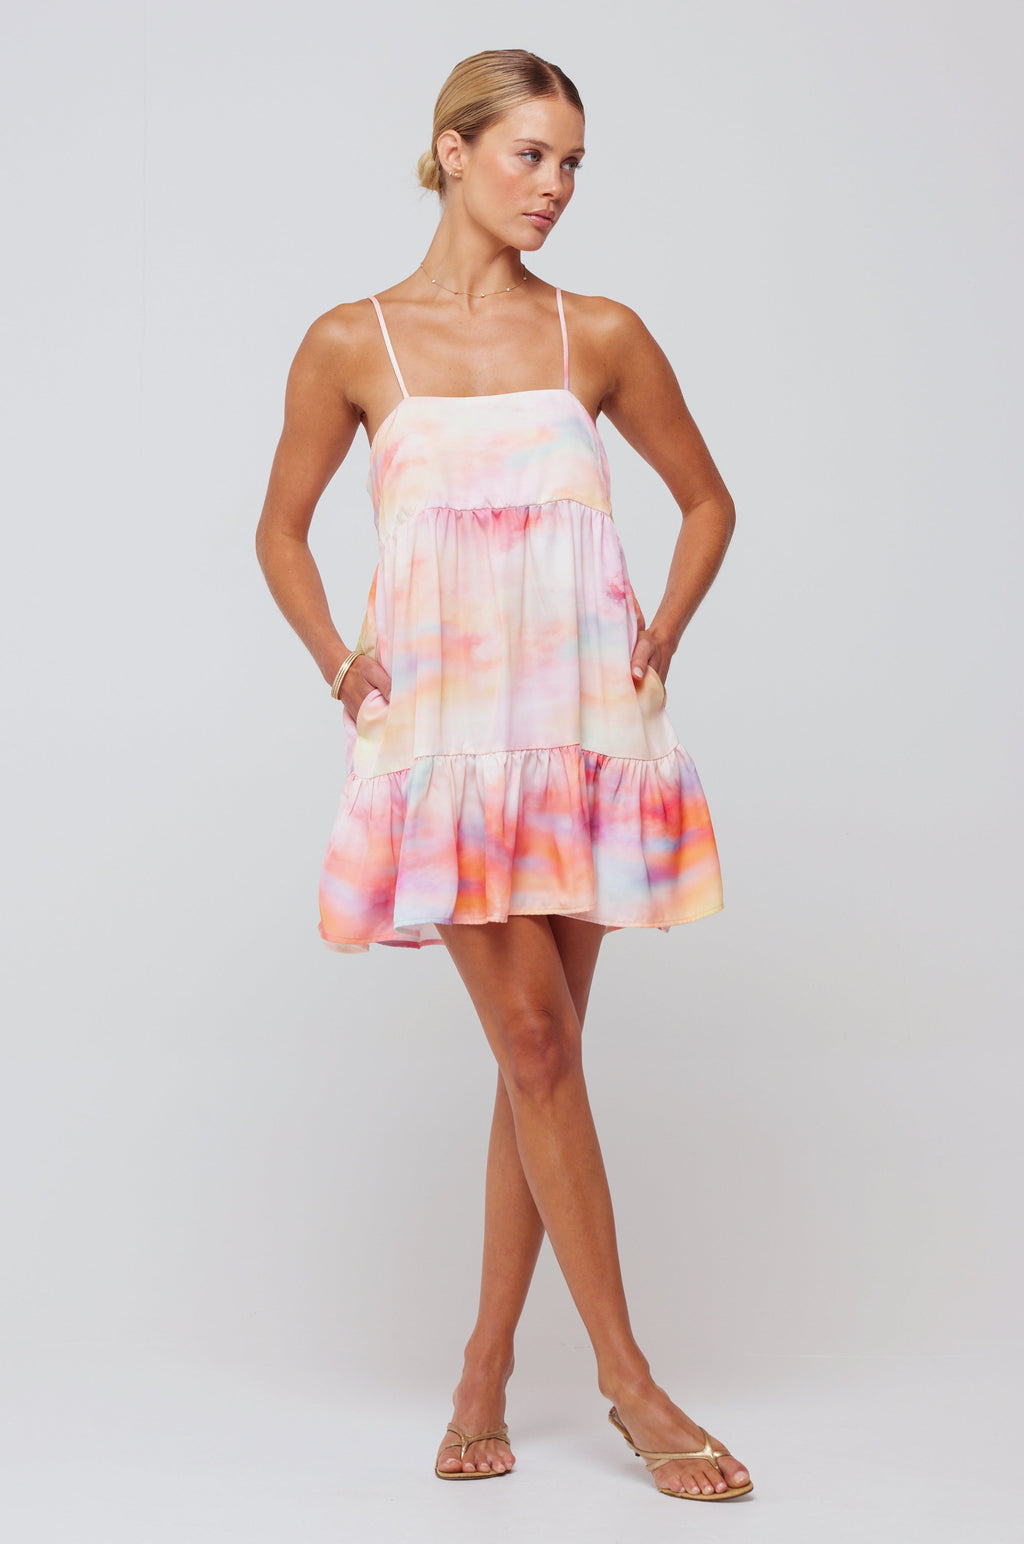 This is an image of Chloe Mini in DayDream - RESA featuring a model wearing the dress